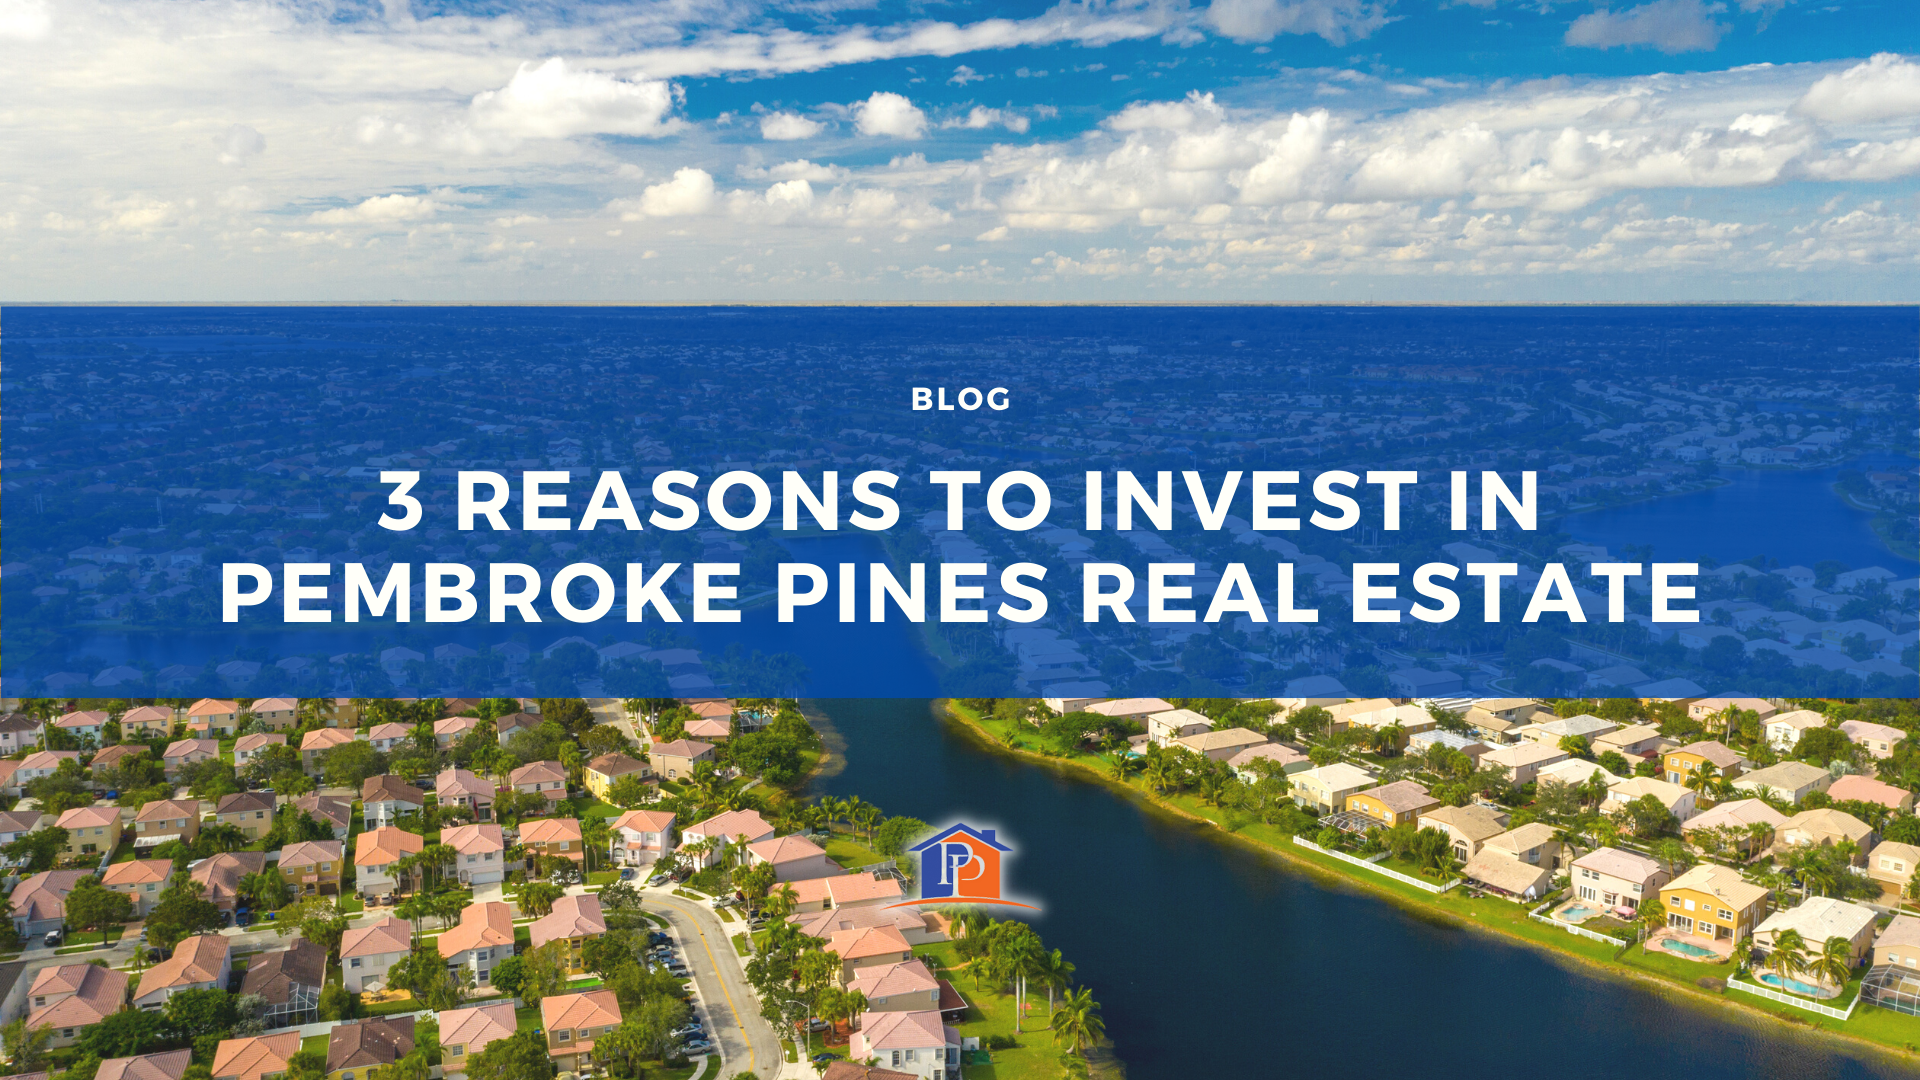 3 Reasons to Invest in Pembroke Pines Real Estate